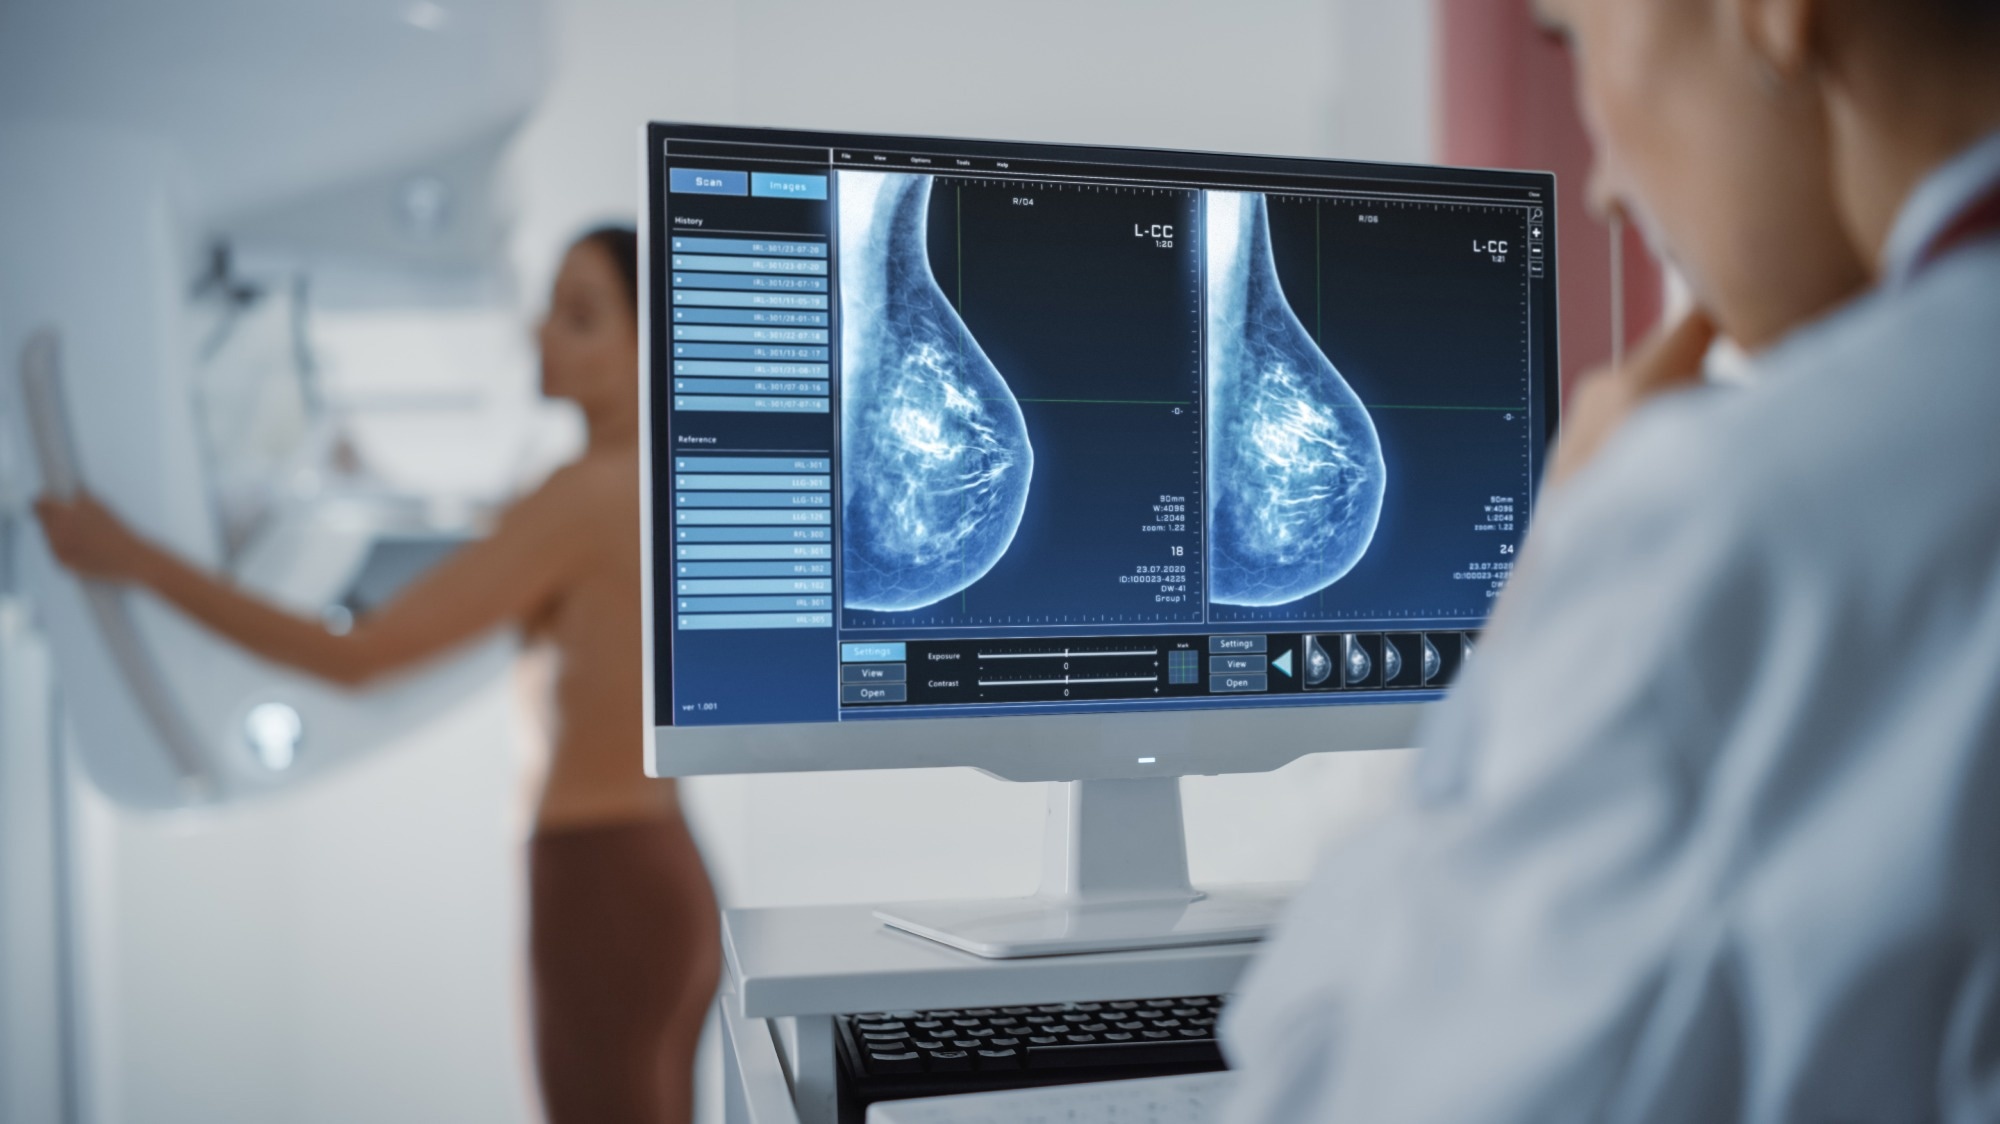 Study: The Potential of Proton Therapy for Locally Advanced Breast Cancer: Clinical and Technical Considerations. Image Credit: Gorodenkoff/Shutterstock